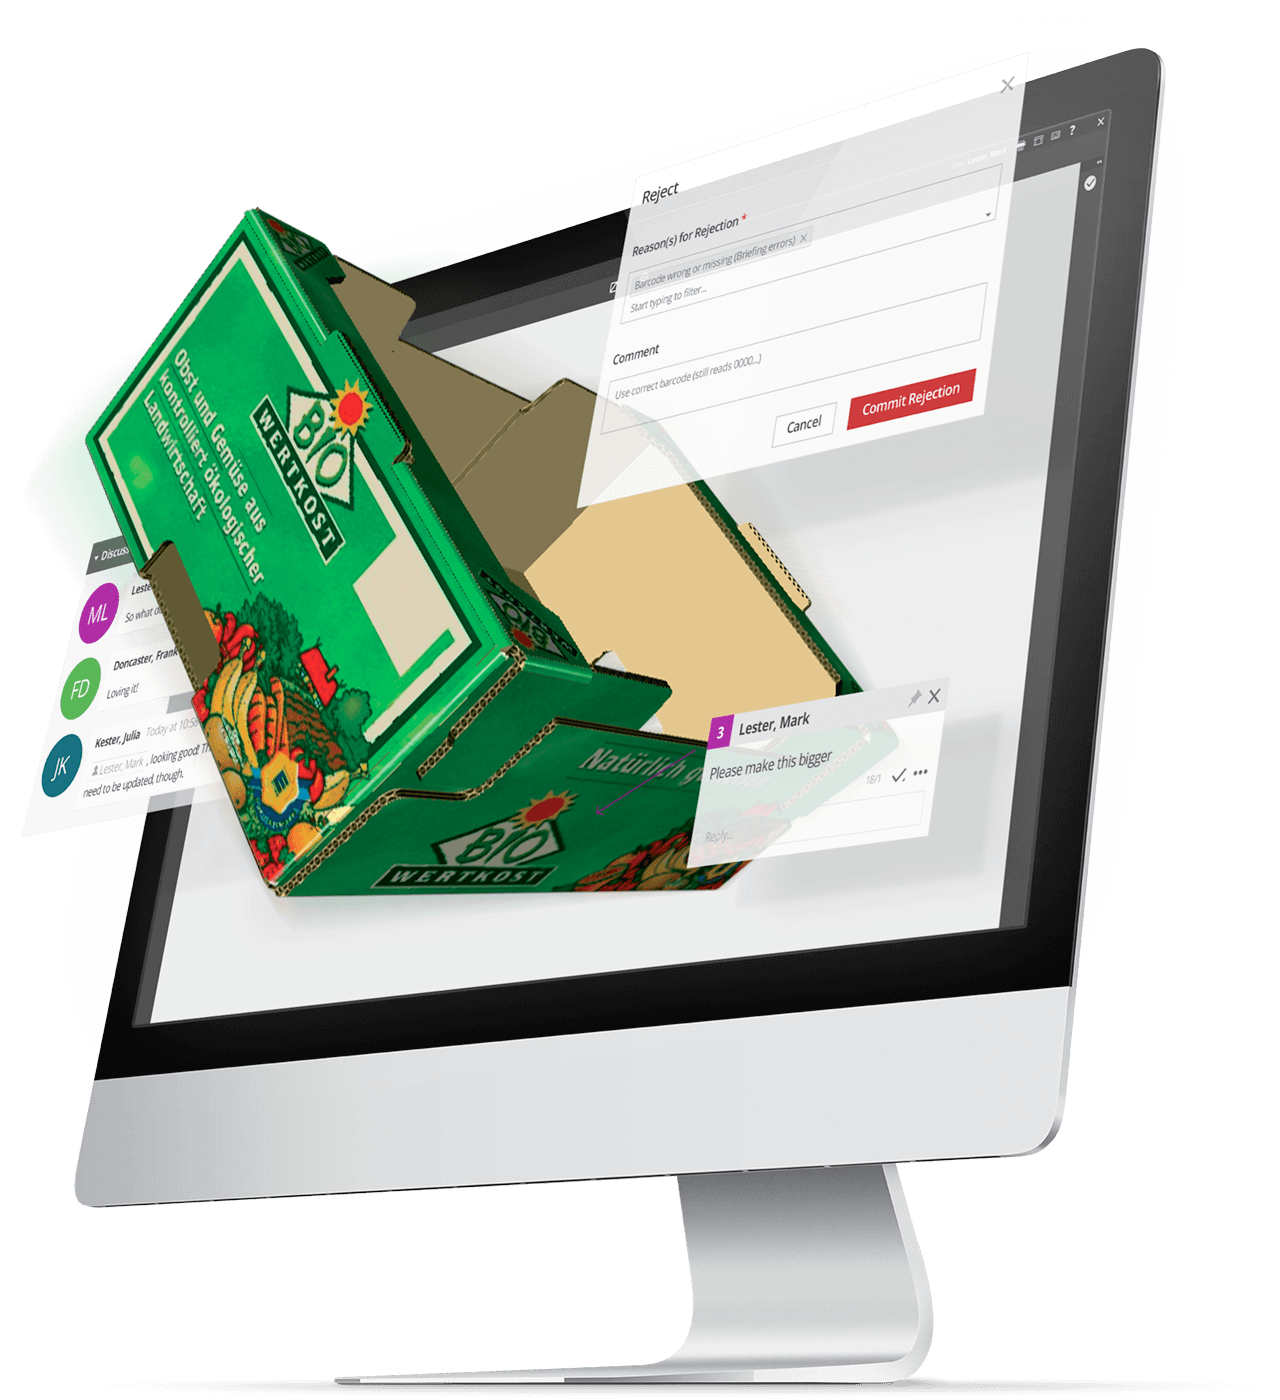 WebCenter: A packaging management solution for brands & suppliers